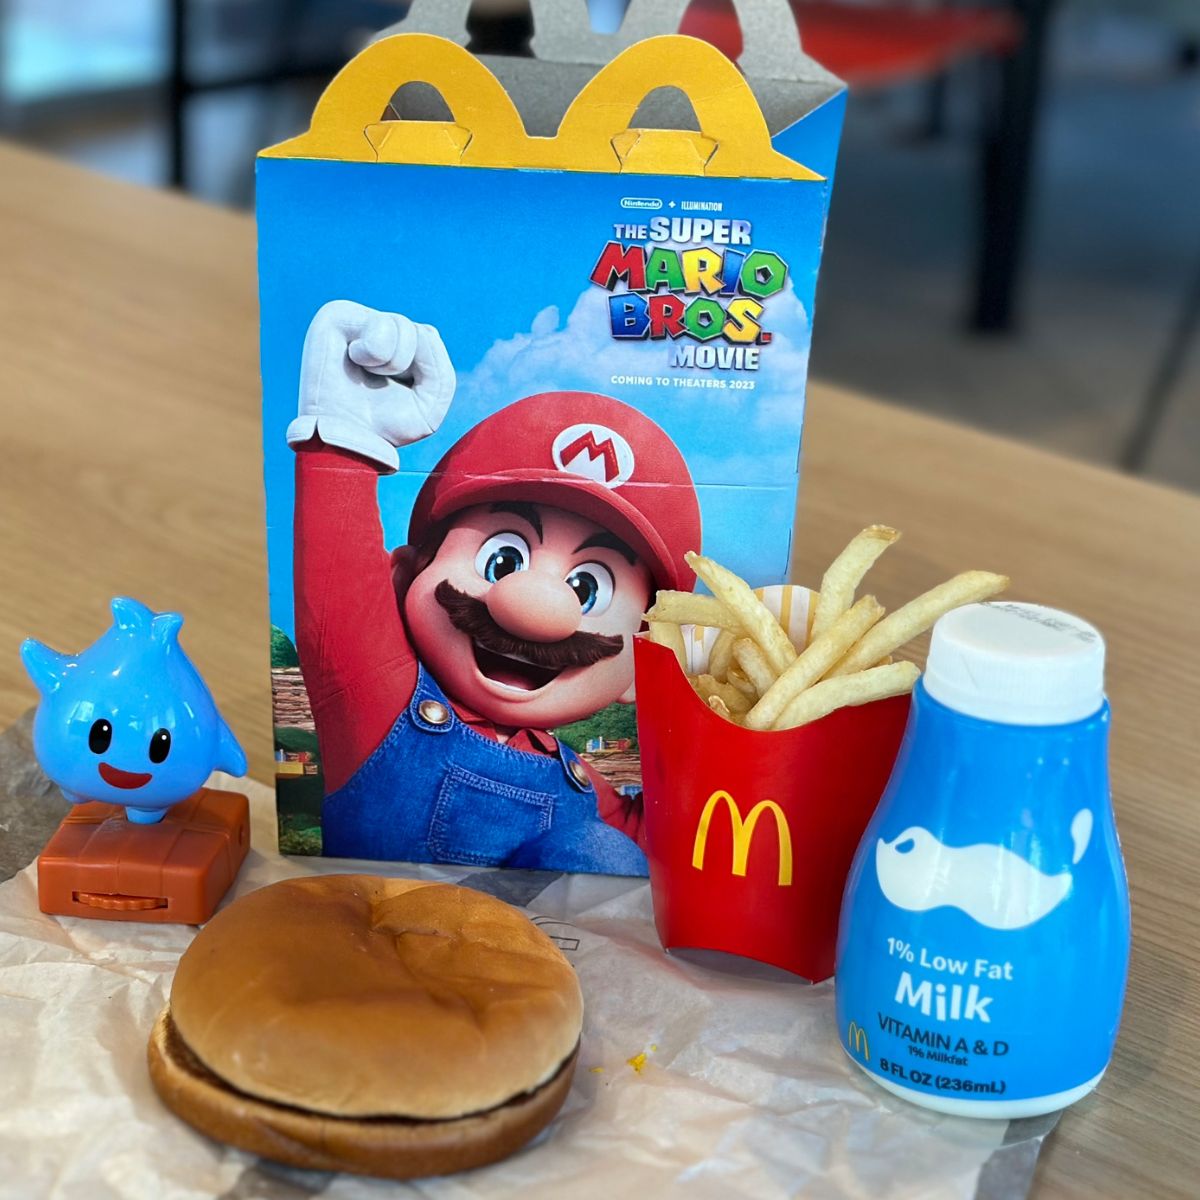 Mario happy meal opened up and spread on a table 